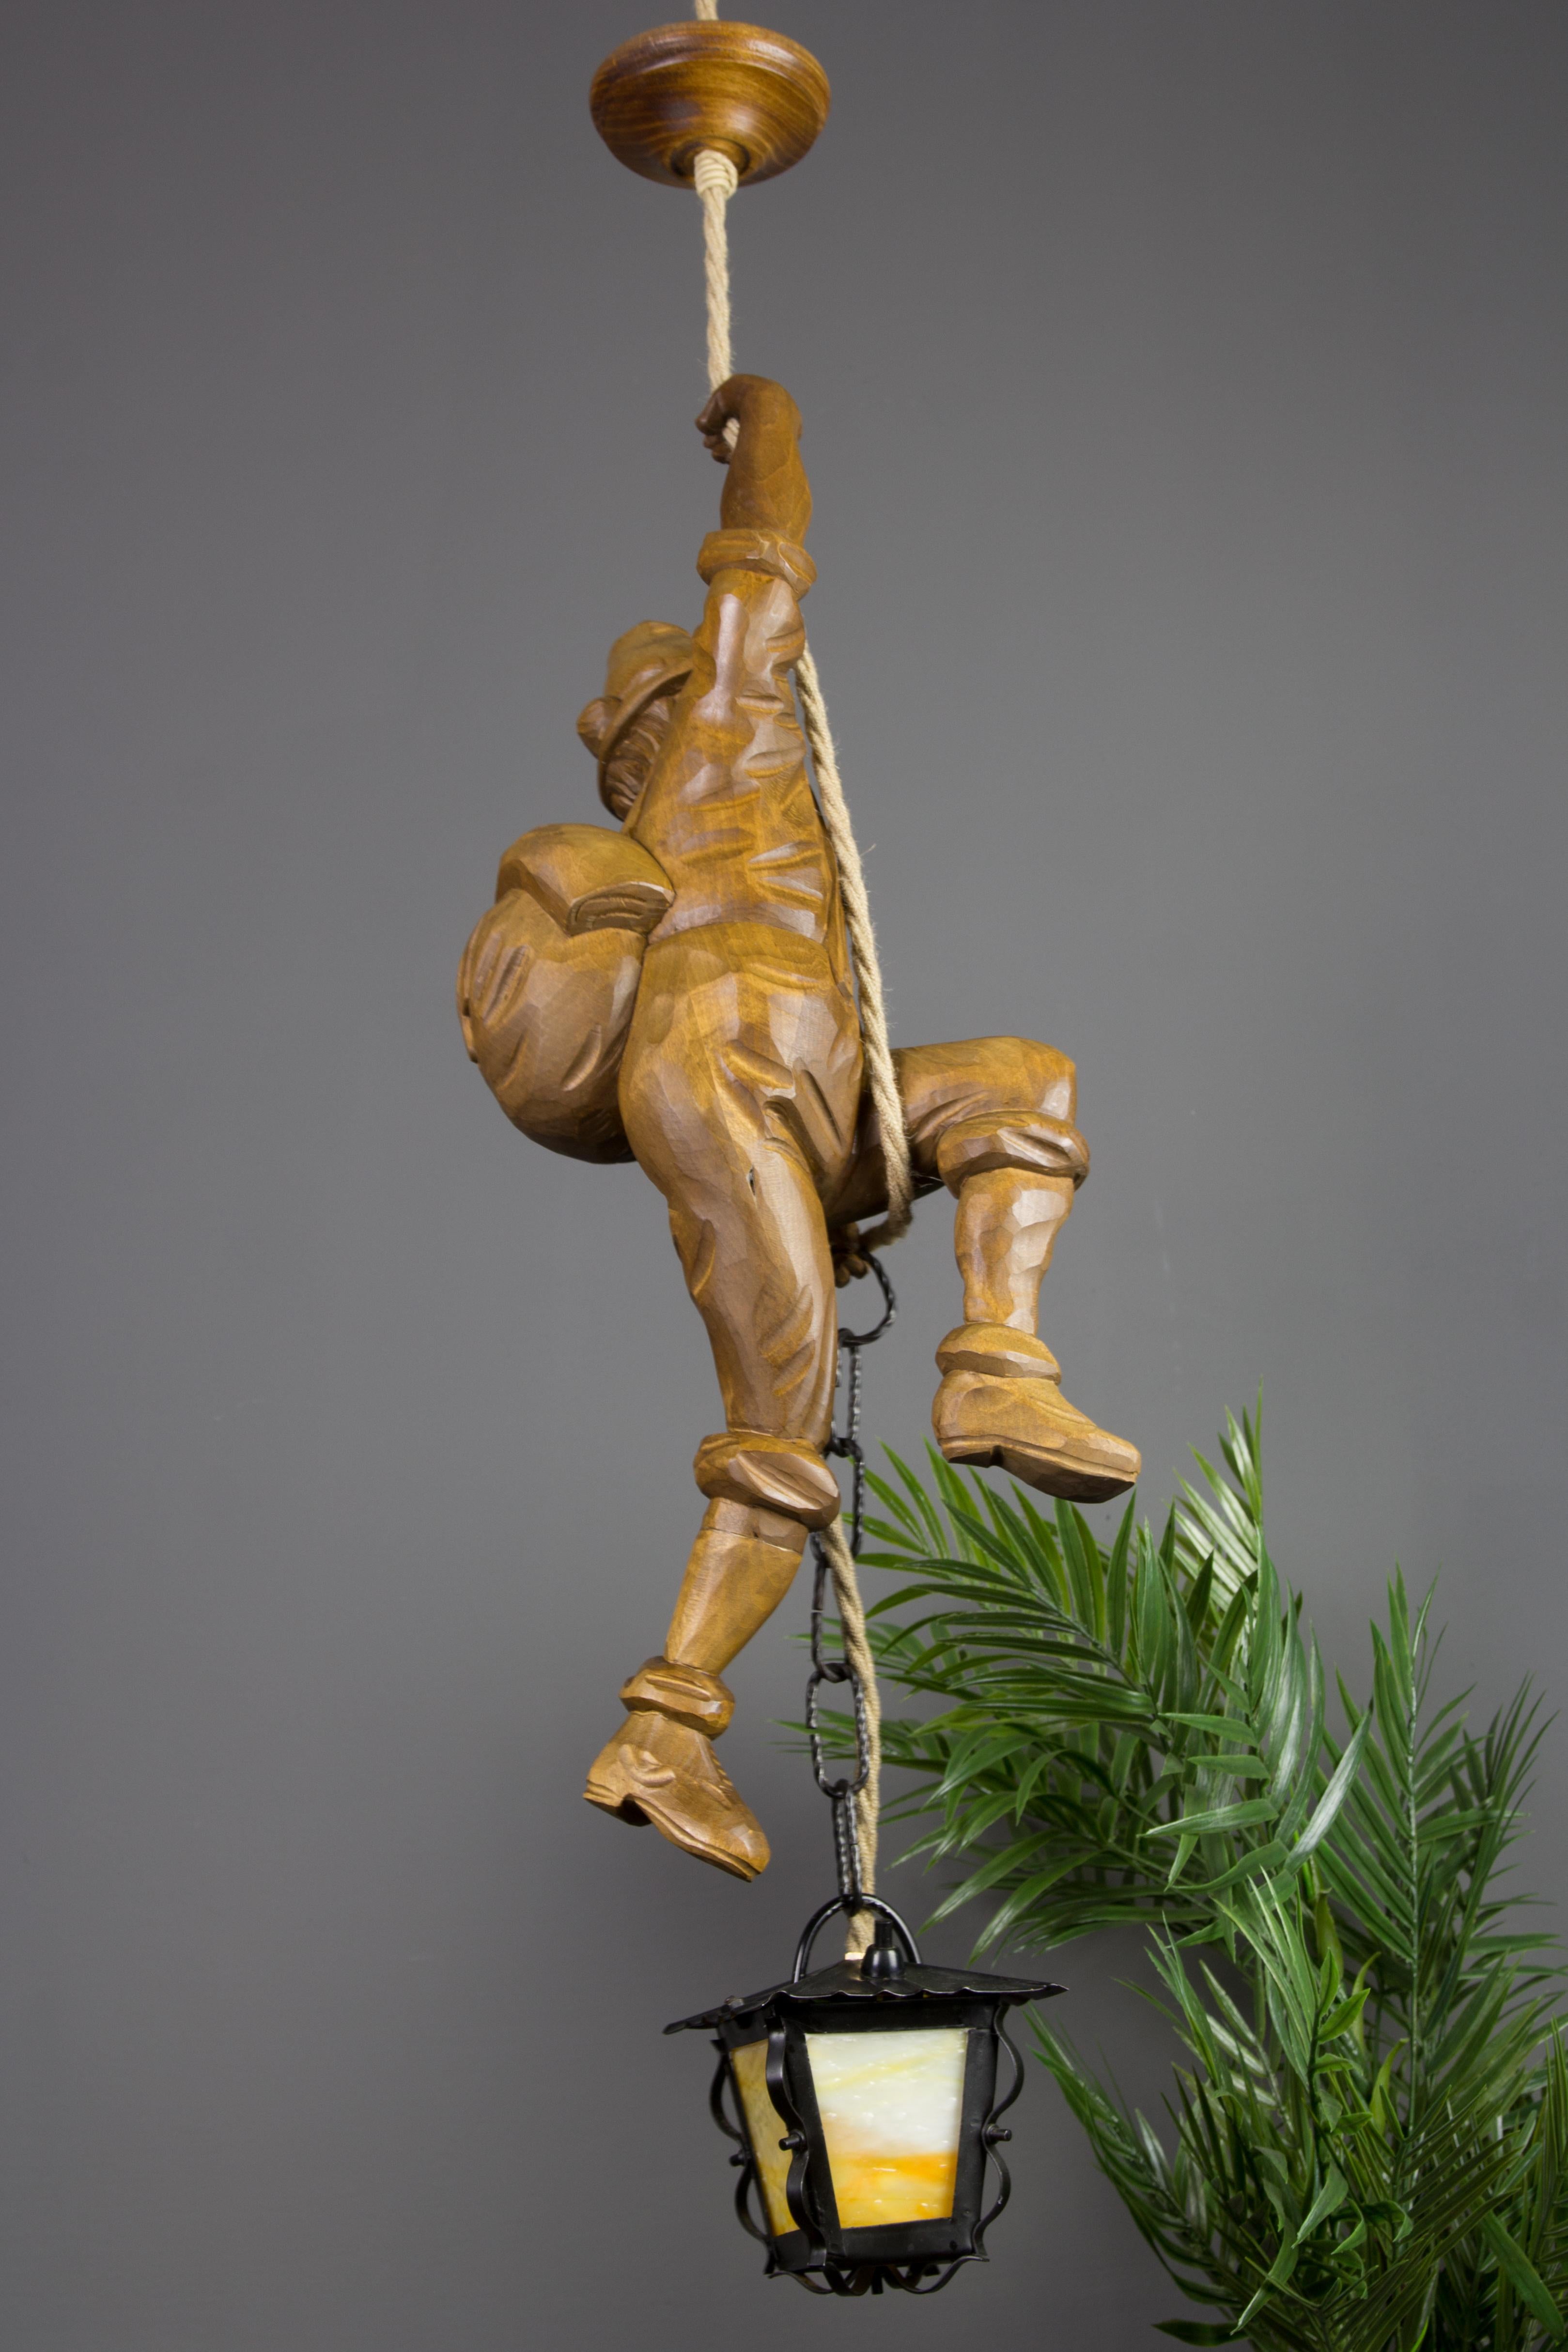 Mid-20th Century Pendant Light Hand Carved Wood Figure Mountaineer Climber with Lantern, Germany For Sale